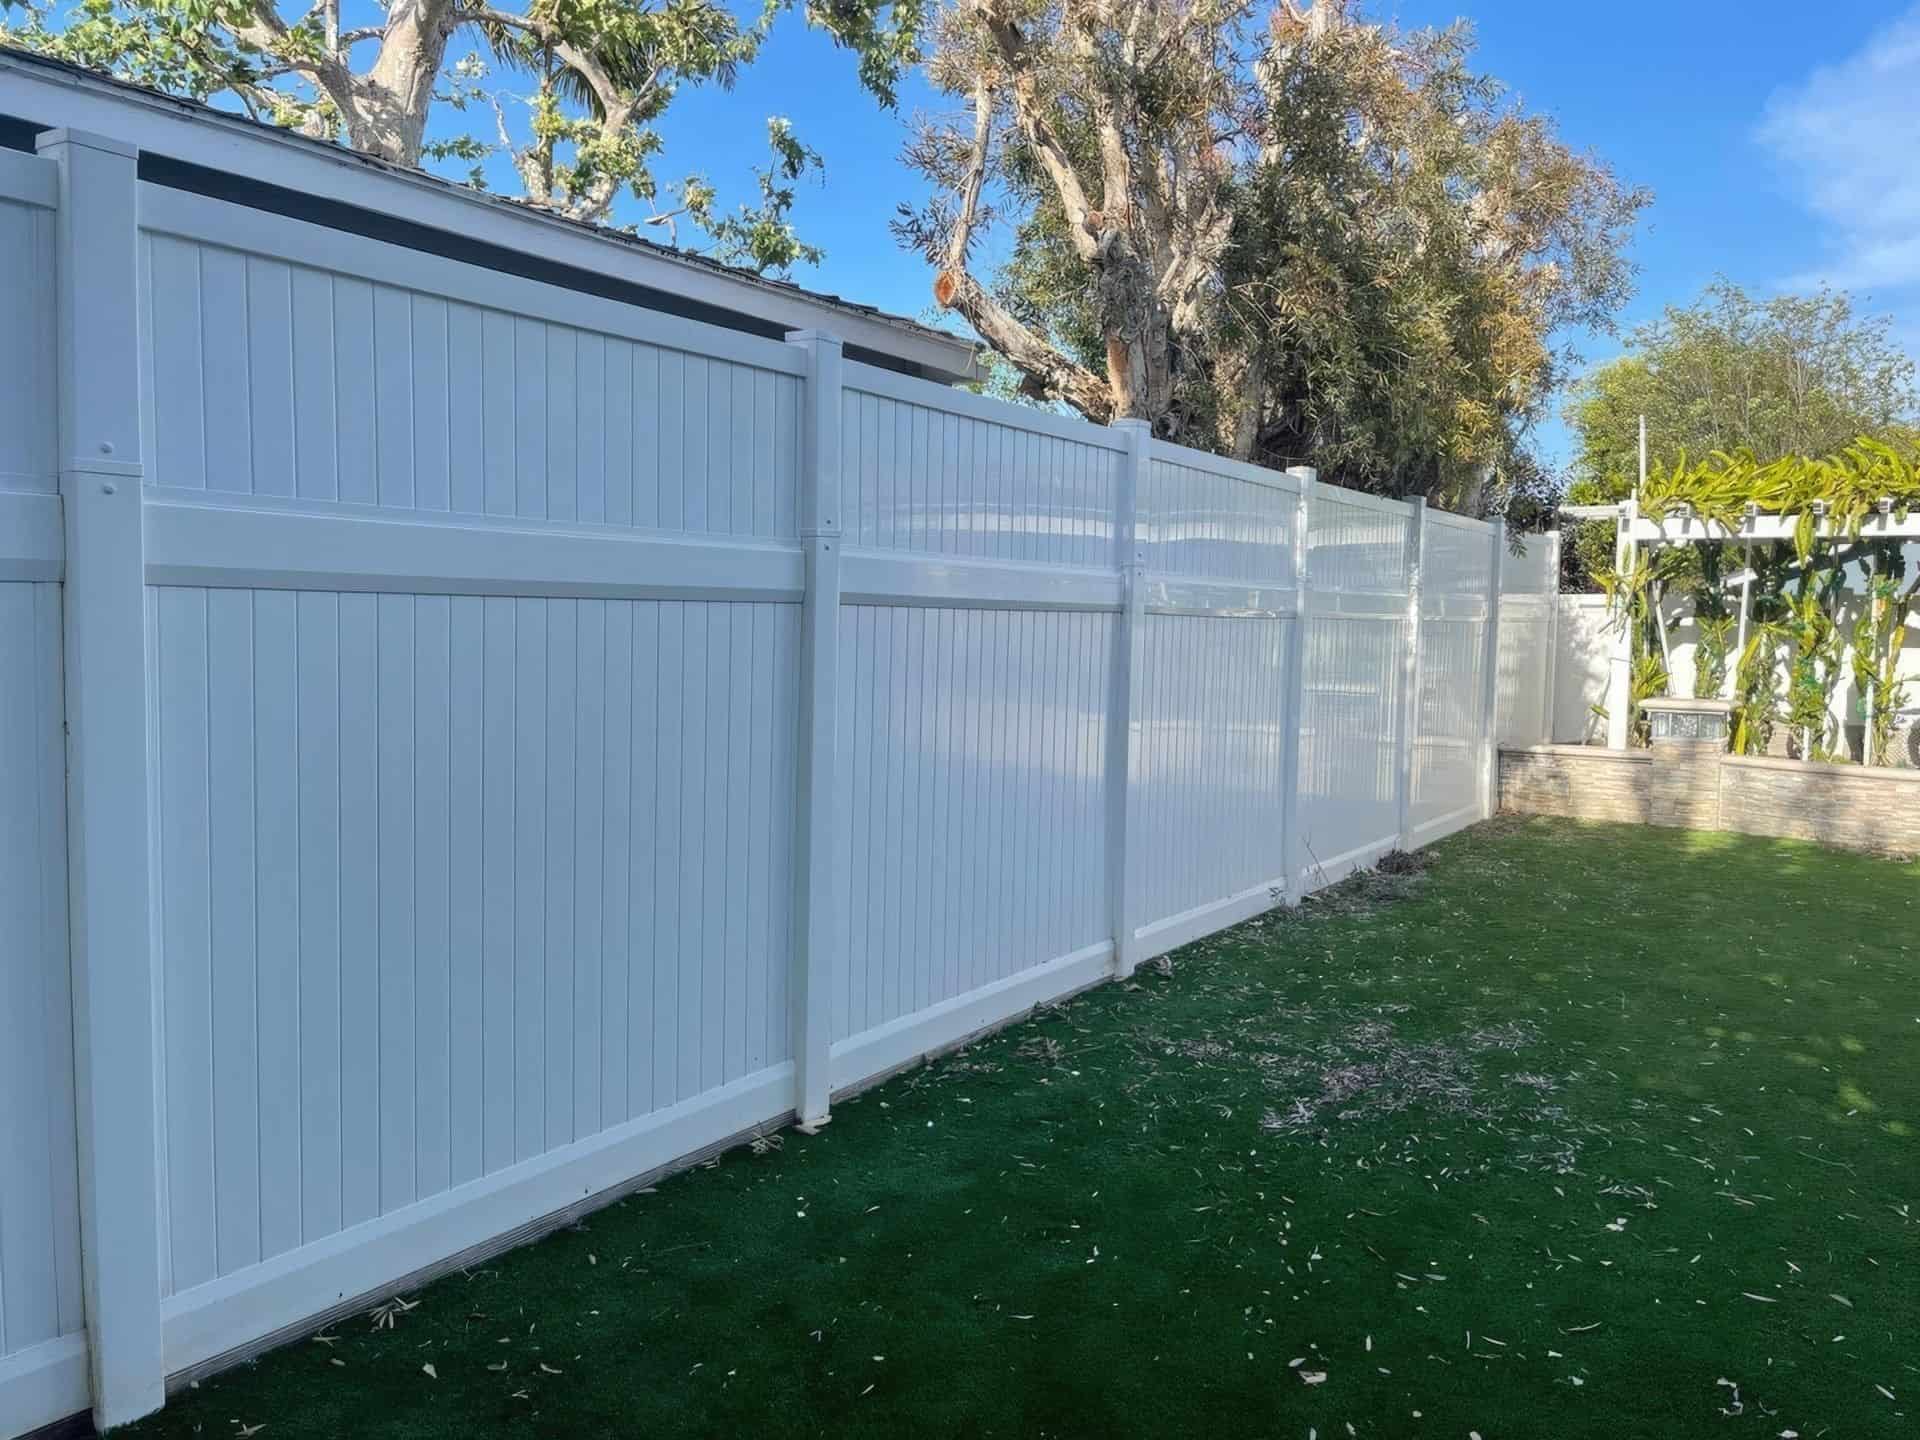 Large vinyl privacy fence separating two houses the from the backyard with a small vertical garden and lush grass.